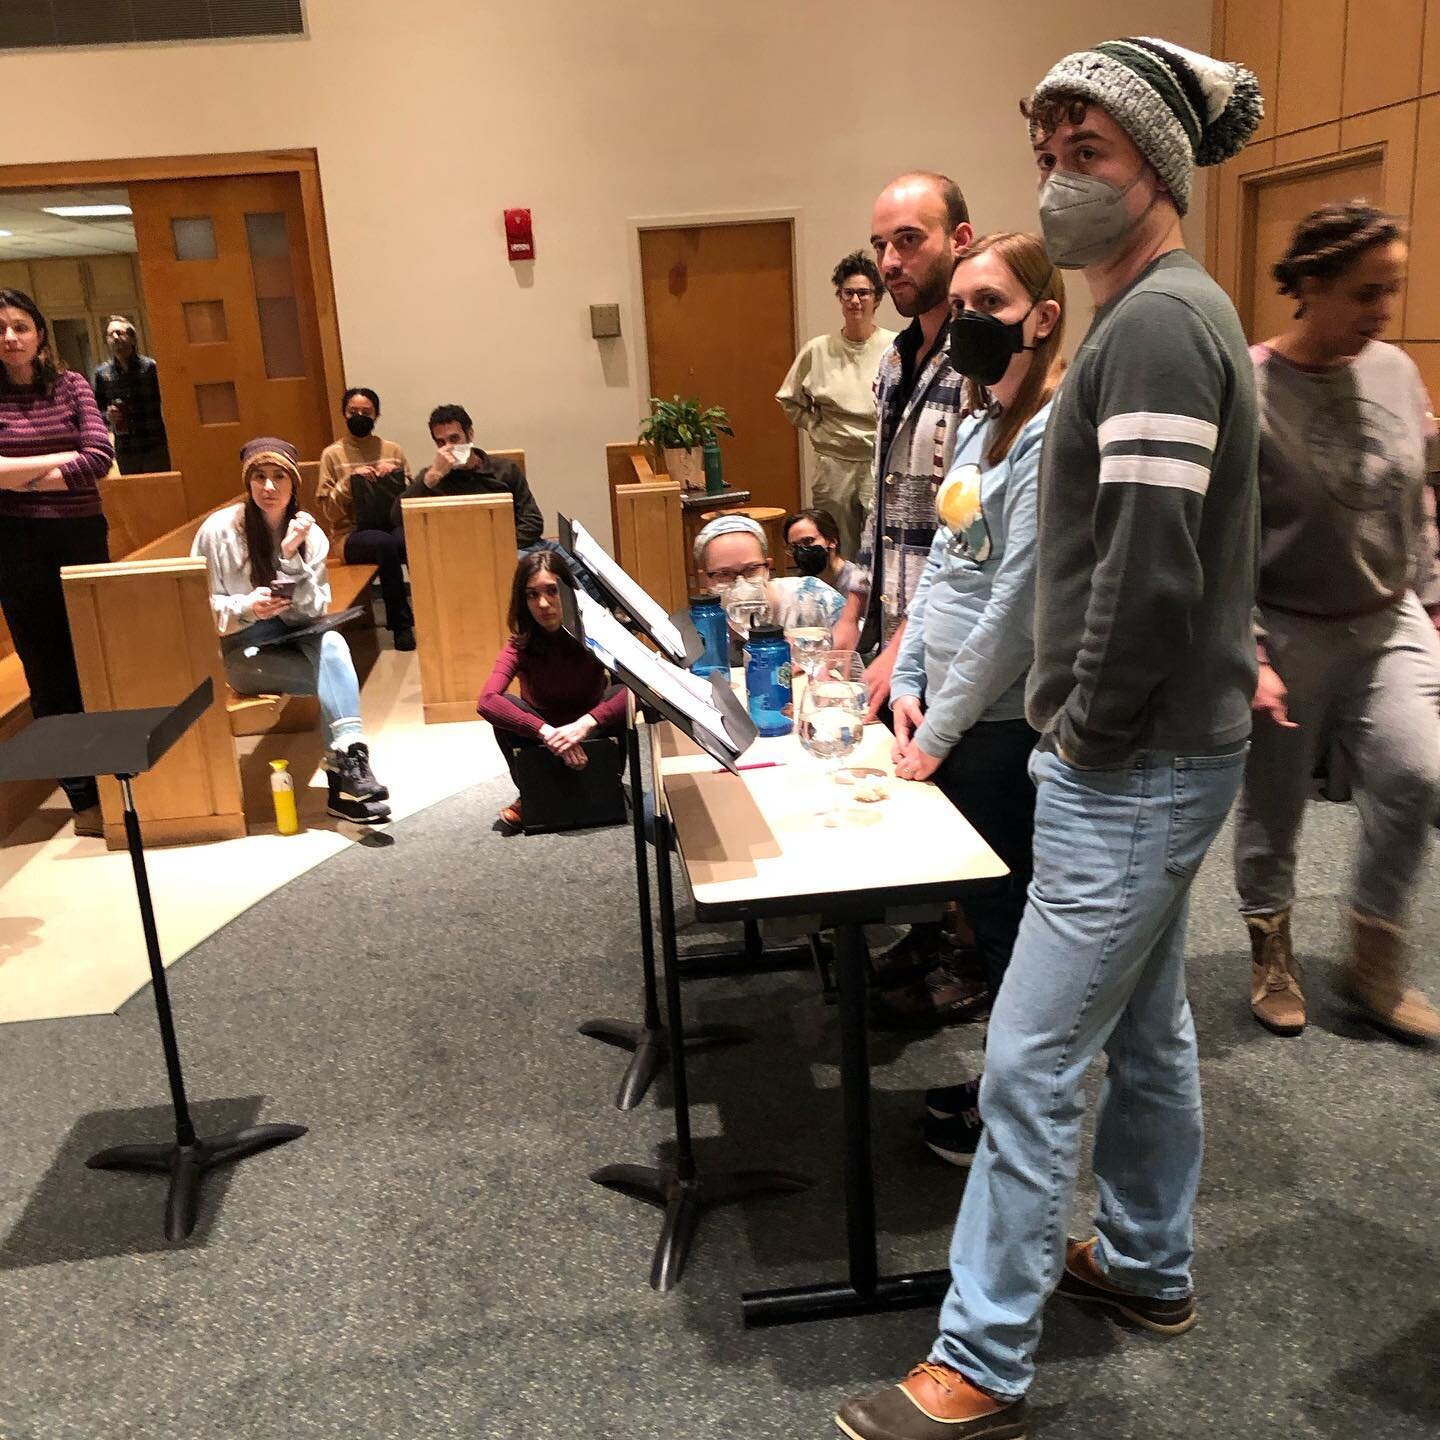 #tbt to one week ago today and our final rehearsal before &ldquo;Winter&rsquo;s Night&rdquo; ❄️ the game faces on the water glass musicians show just how seriously we take concert prep, especially when being tasked with playing AND singing! 

They cr